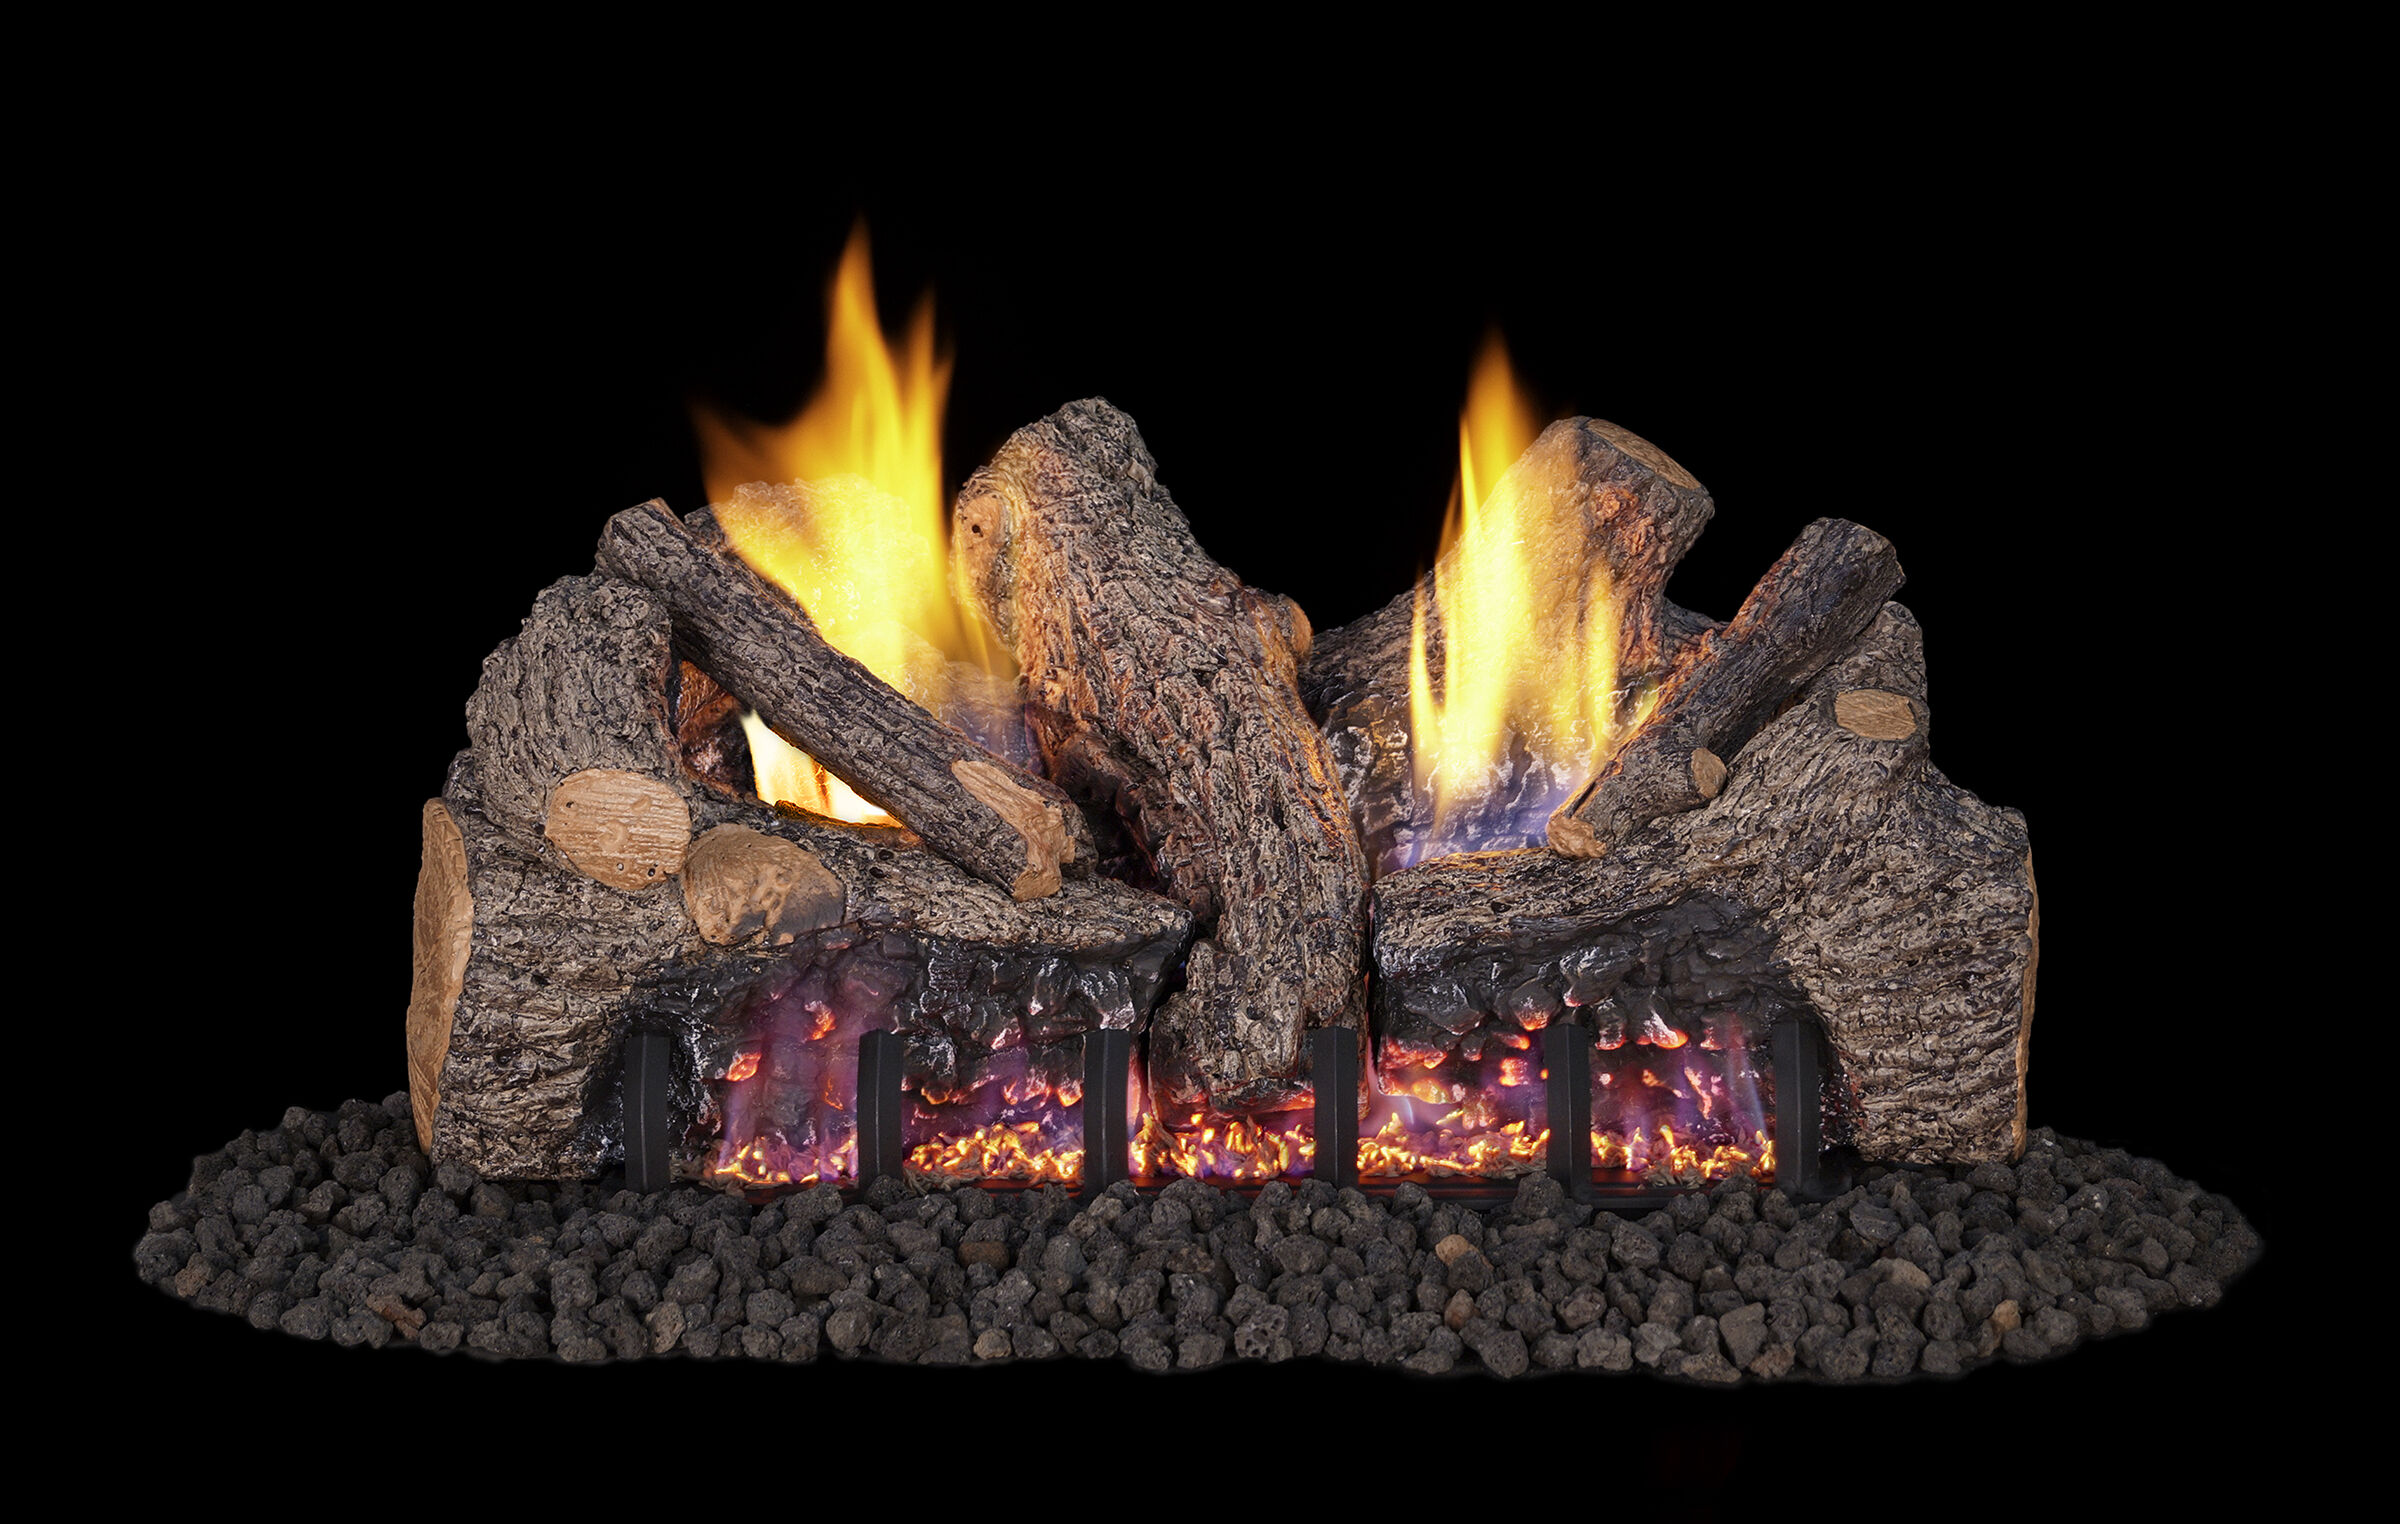 A Ventless gas log set with rugged, brown-gray bark, a black fireplace grate, black lava rock, and yellow flames.